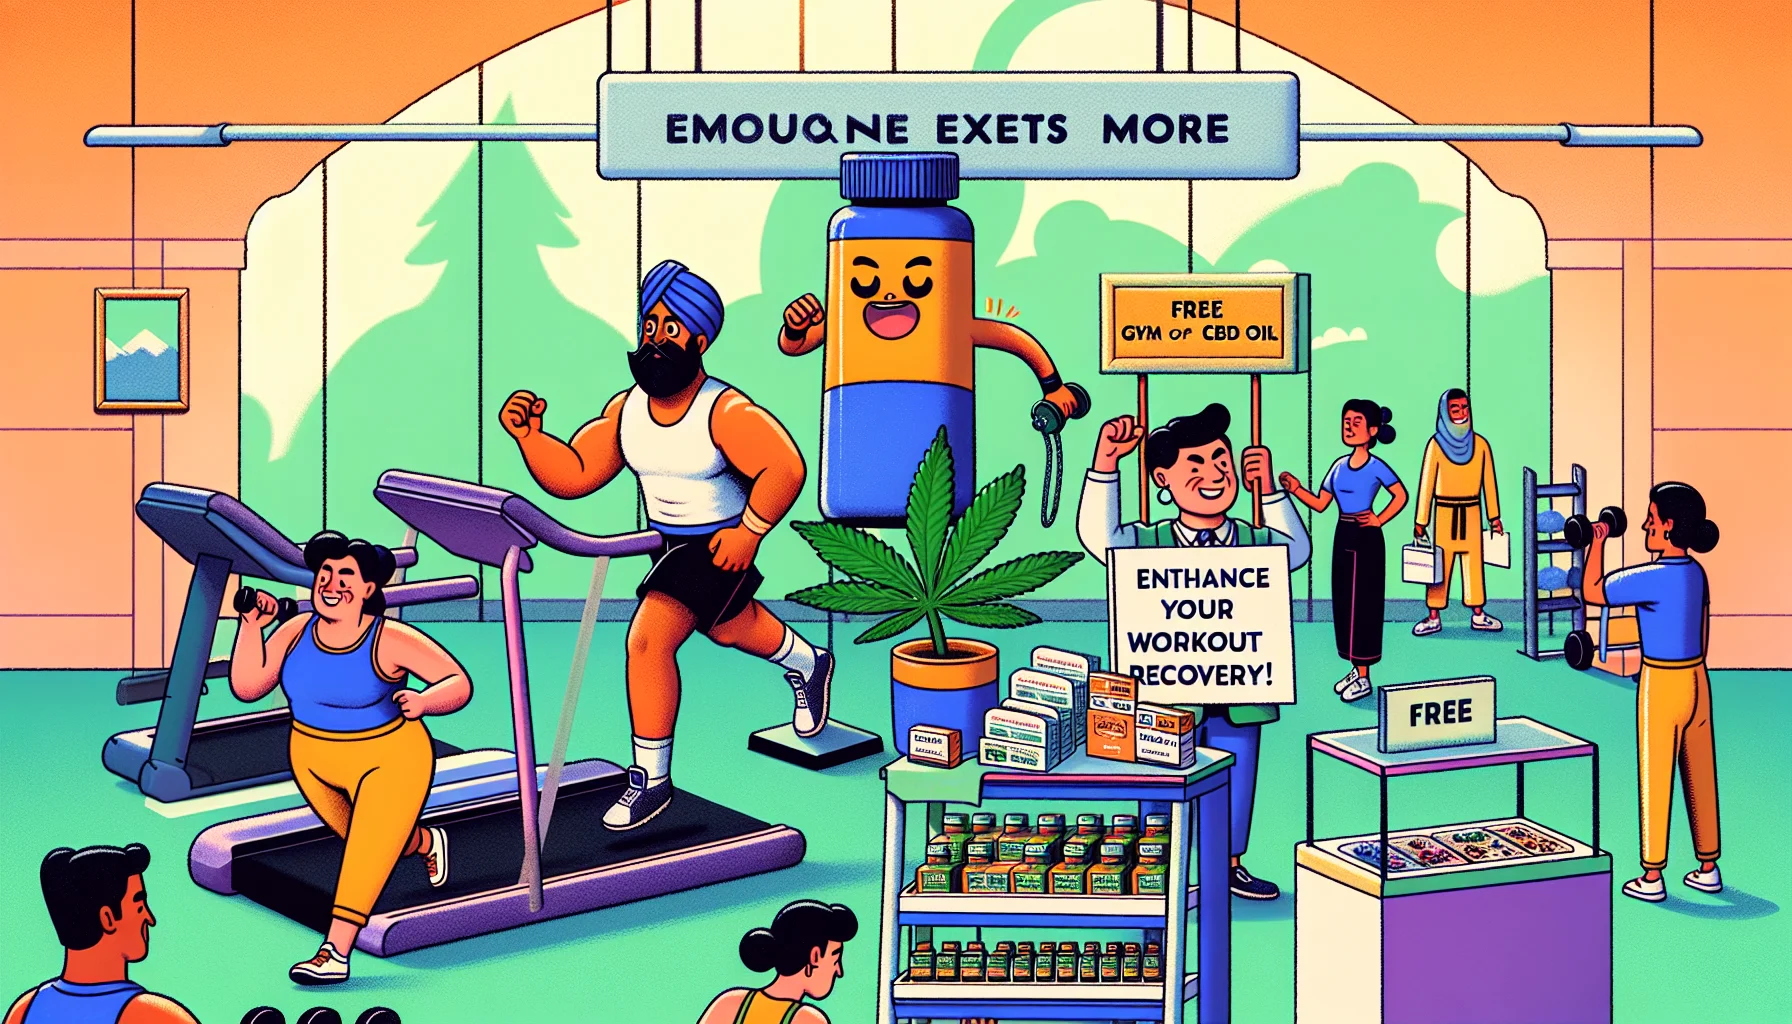 Let's imagine a humorous scenario to encourage people to exercise more. Picture an animated scene in a typical gym environment. There's a buff, typical gym-goer who is of South Asian descent, furiously working out on a treadmill. Nearby, a Middle-Eastern woman is lifting weights with focus and determination. In the corner of the gym, a cheery gym assistant of Caucasian descent is behind a stand which holds free samples of CBD oil. The stand has a sign that playfully says 'Enhance Your Workout Recovery!'. A cartoonish, fun representation of CBD oil, complete with arms and legs, is doing various exercises, suggesting it's ready to join them in their workout regimen.